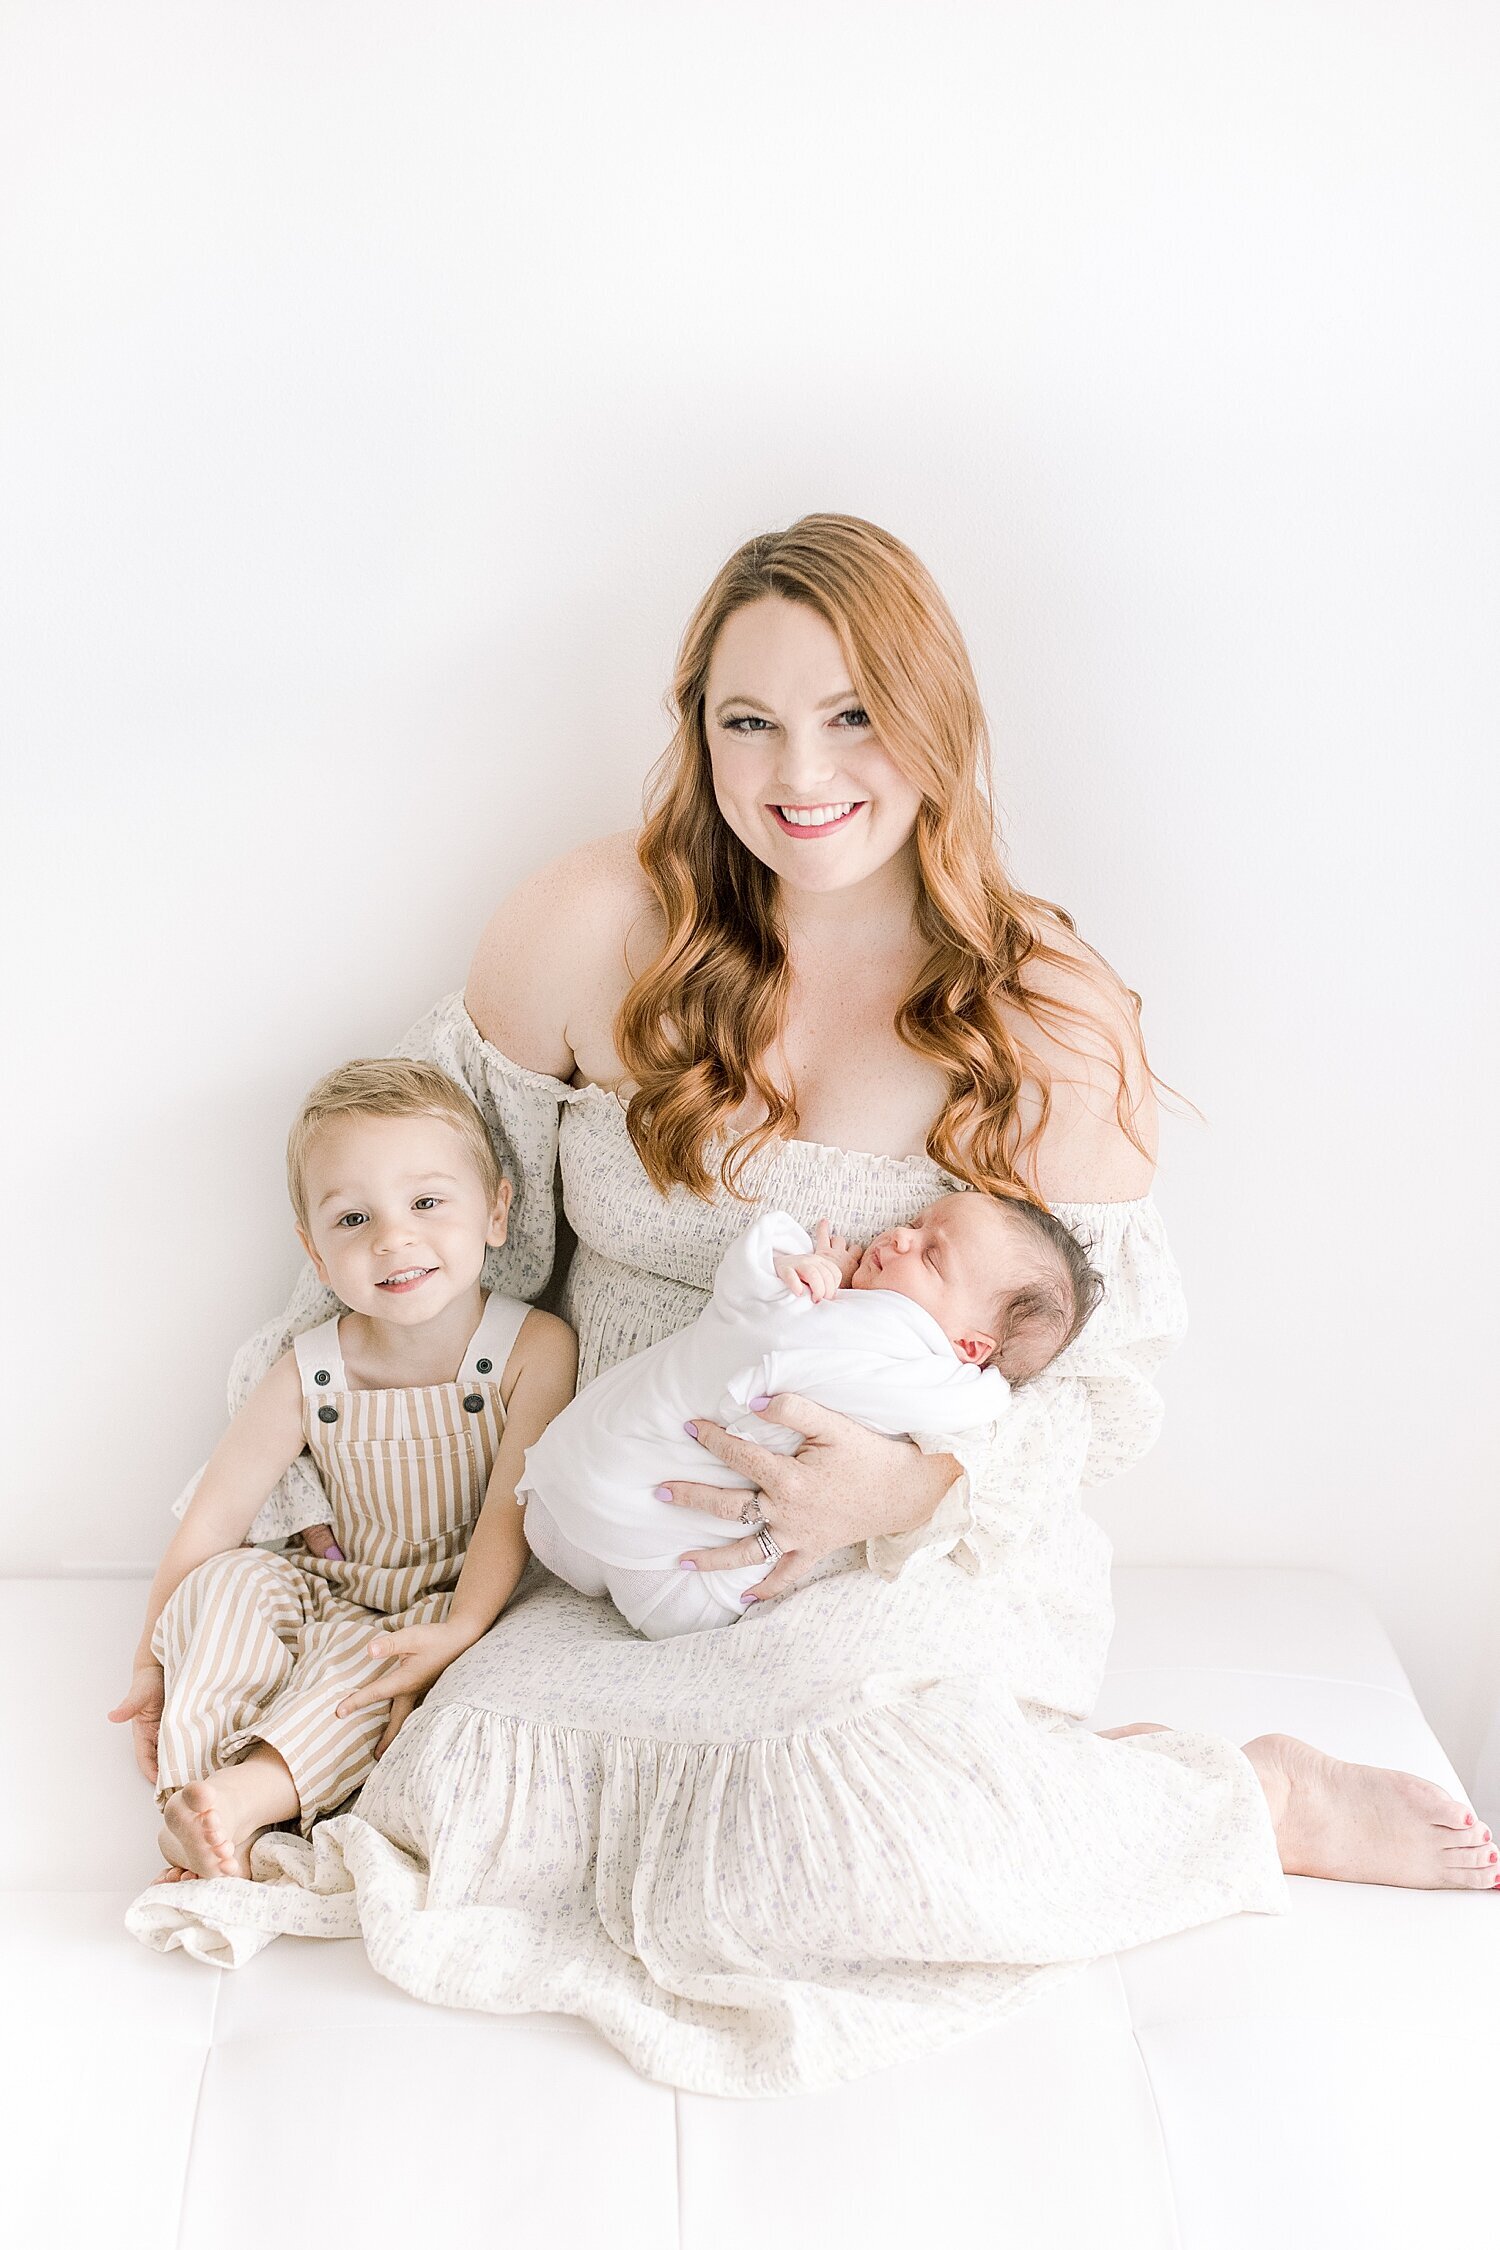 Photo of mom, son and newborn baby girl. Photo by Ambre Williams Photography.